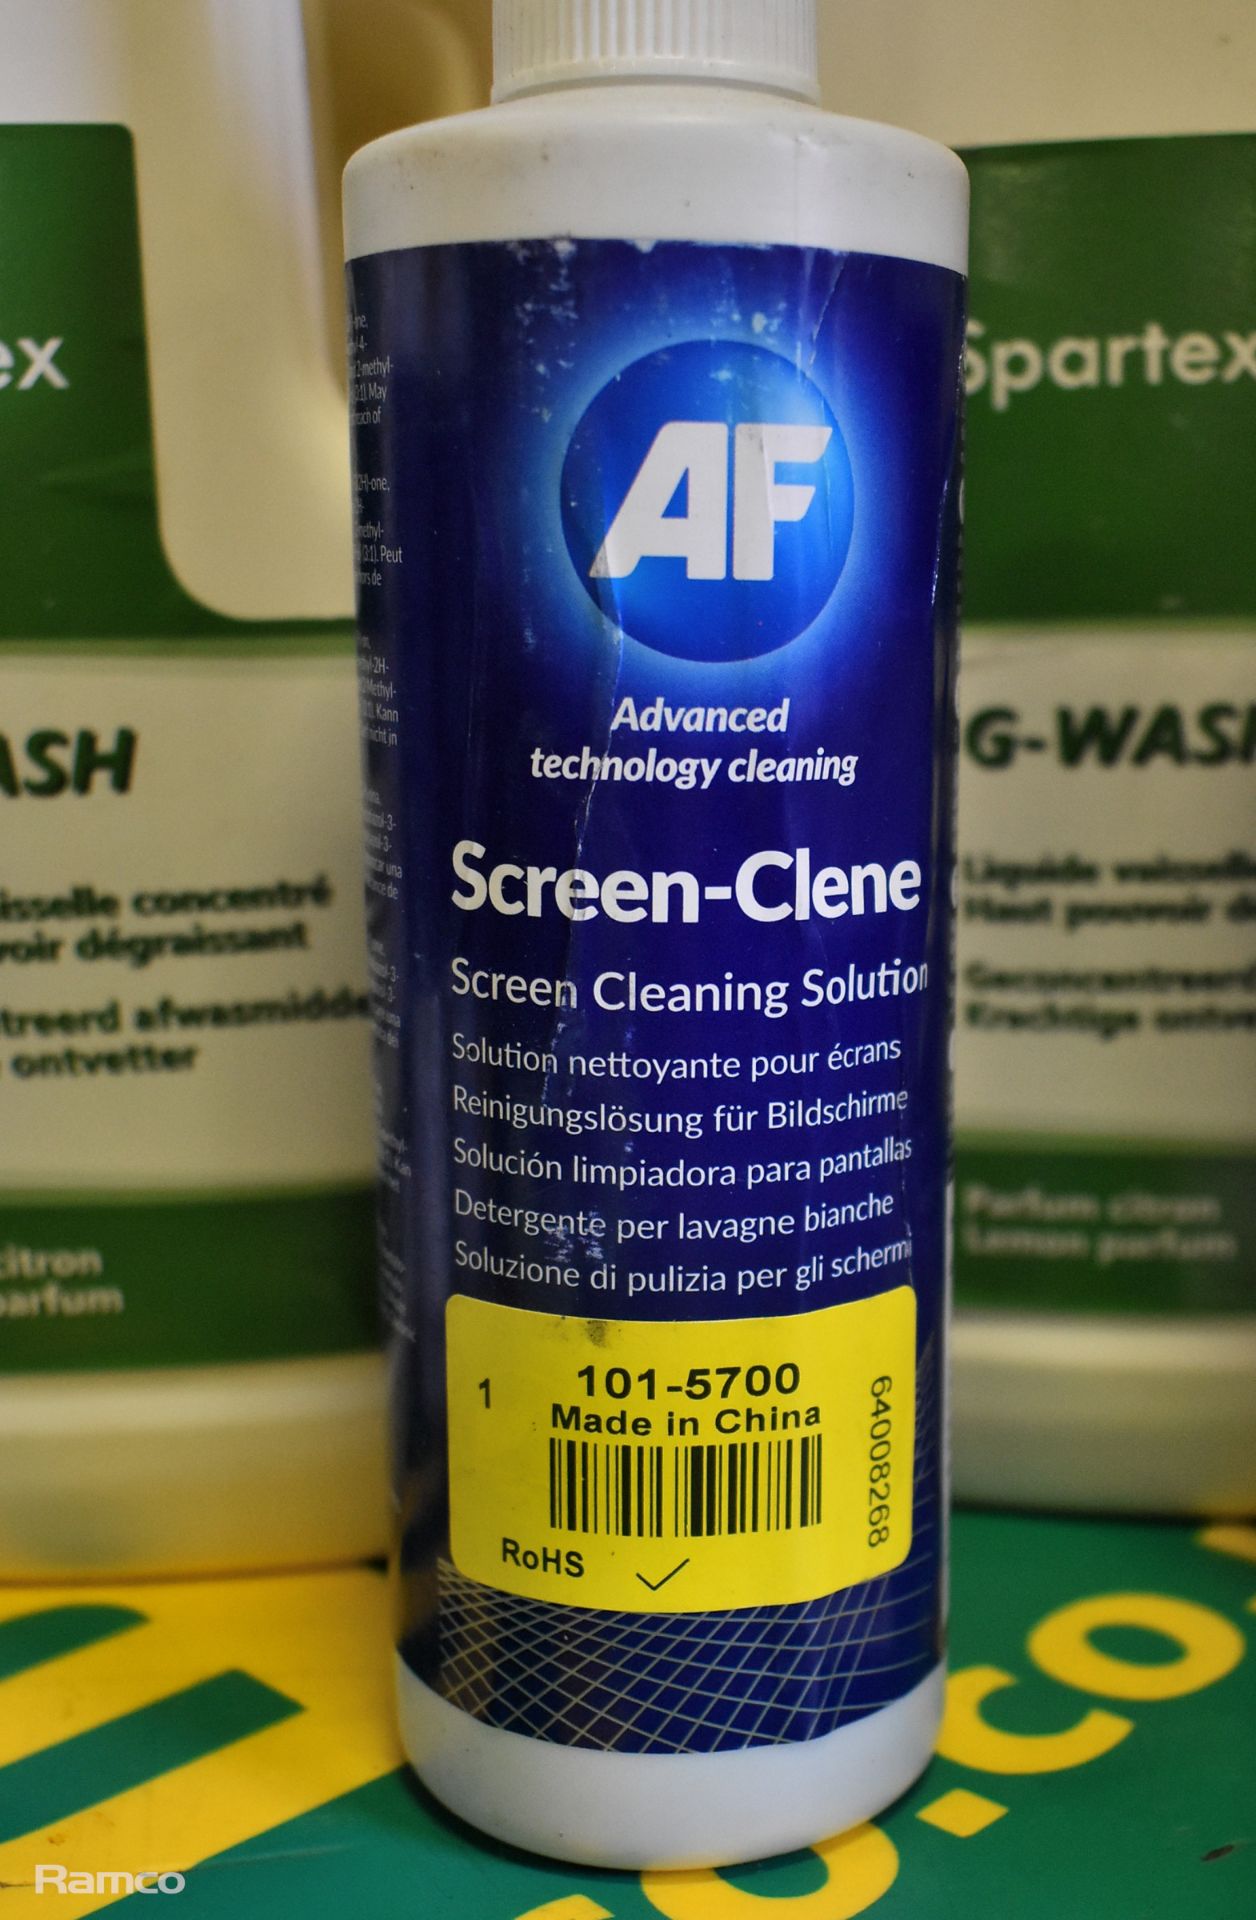 Cleaning products - concentrated dishwashing liquid, screen cleaning solutions and bleached cloths - Image 4 of 12